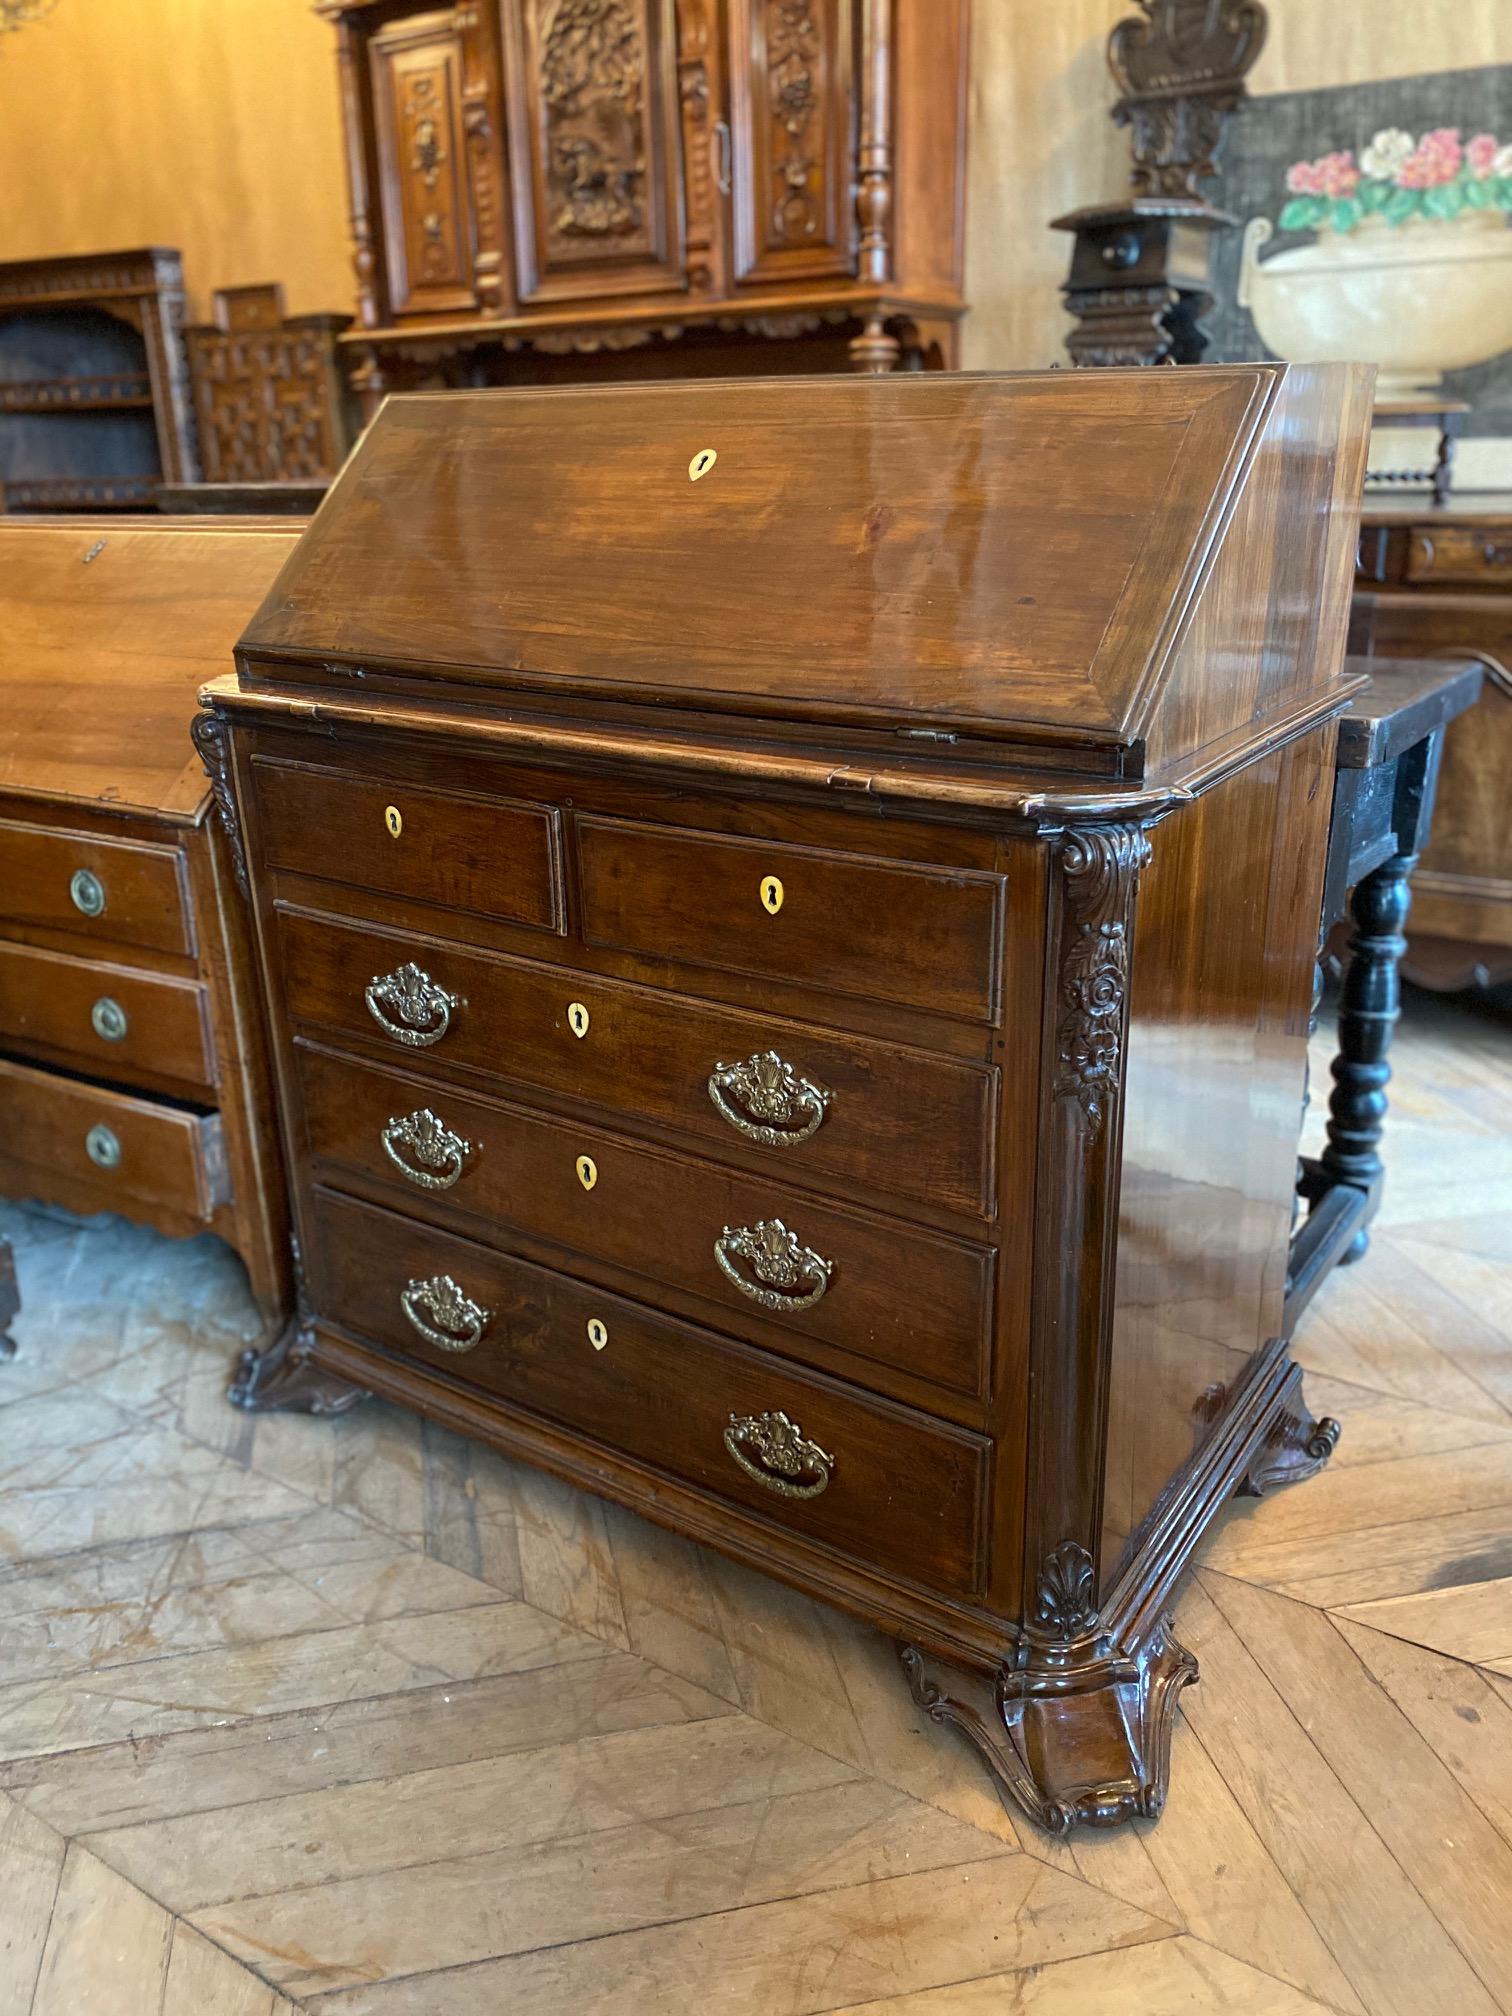 This stunning rosewood secretaire features many drawers, storage spaces, and intricate carvings decorate the exterior. A beautiful piece that serves both functional and aesthetic purposes.

Measurements: 47